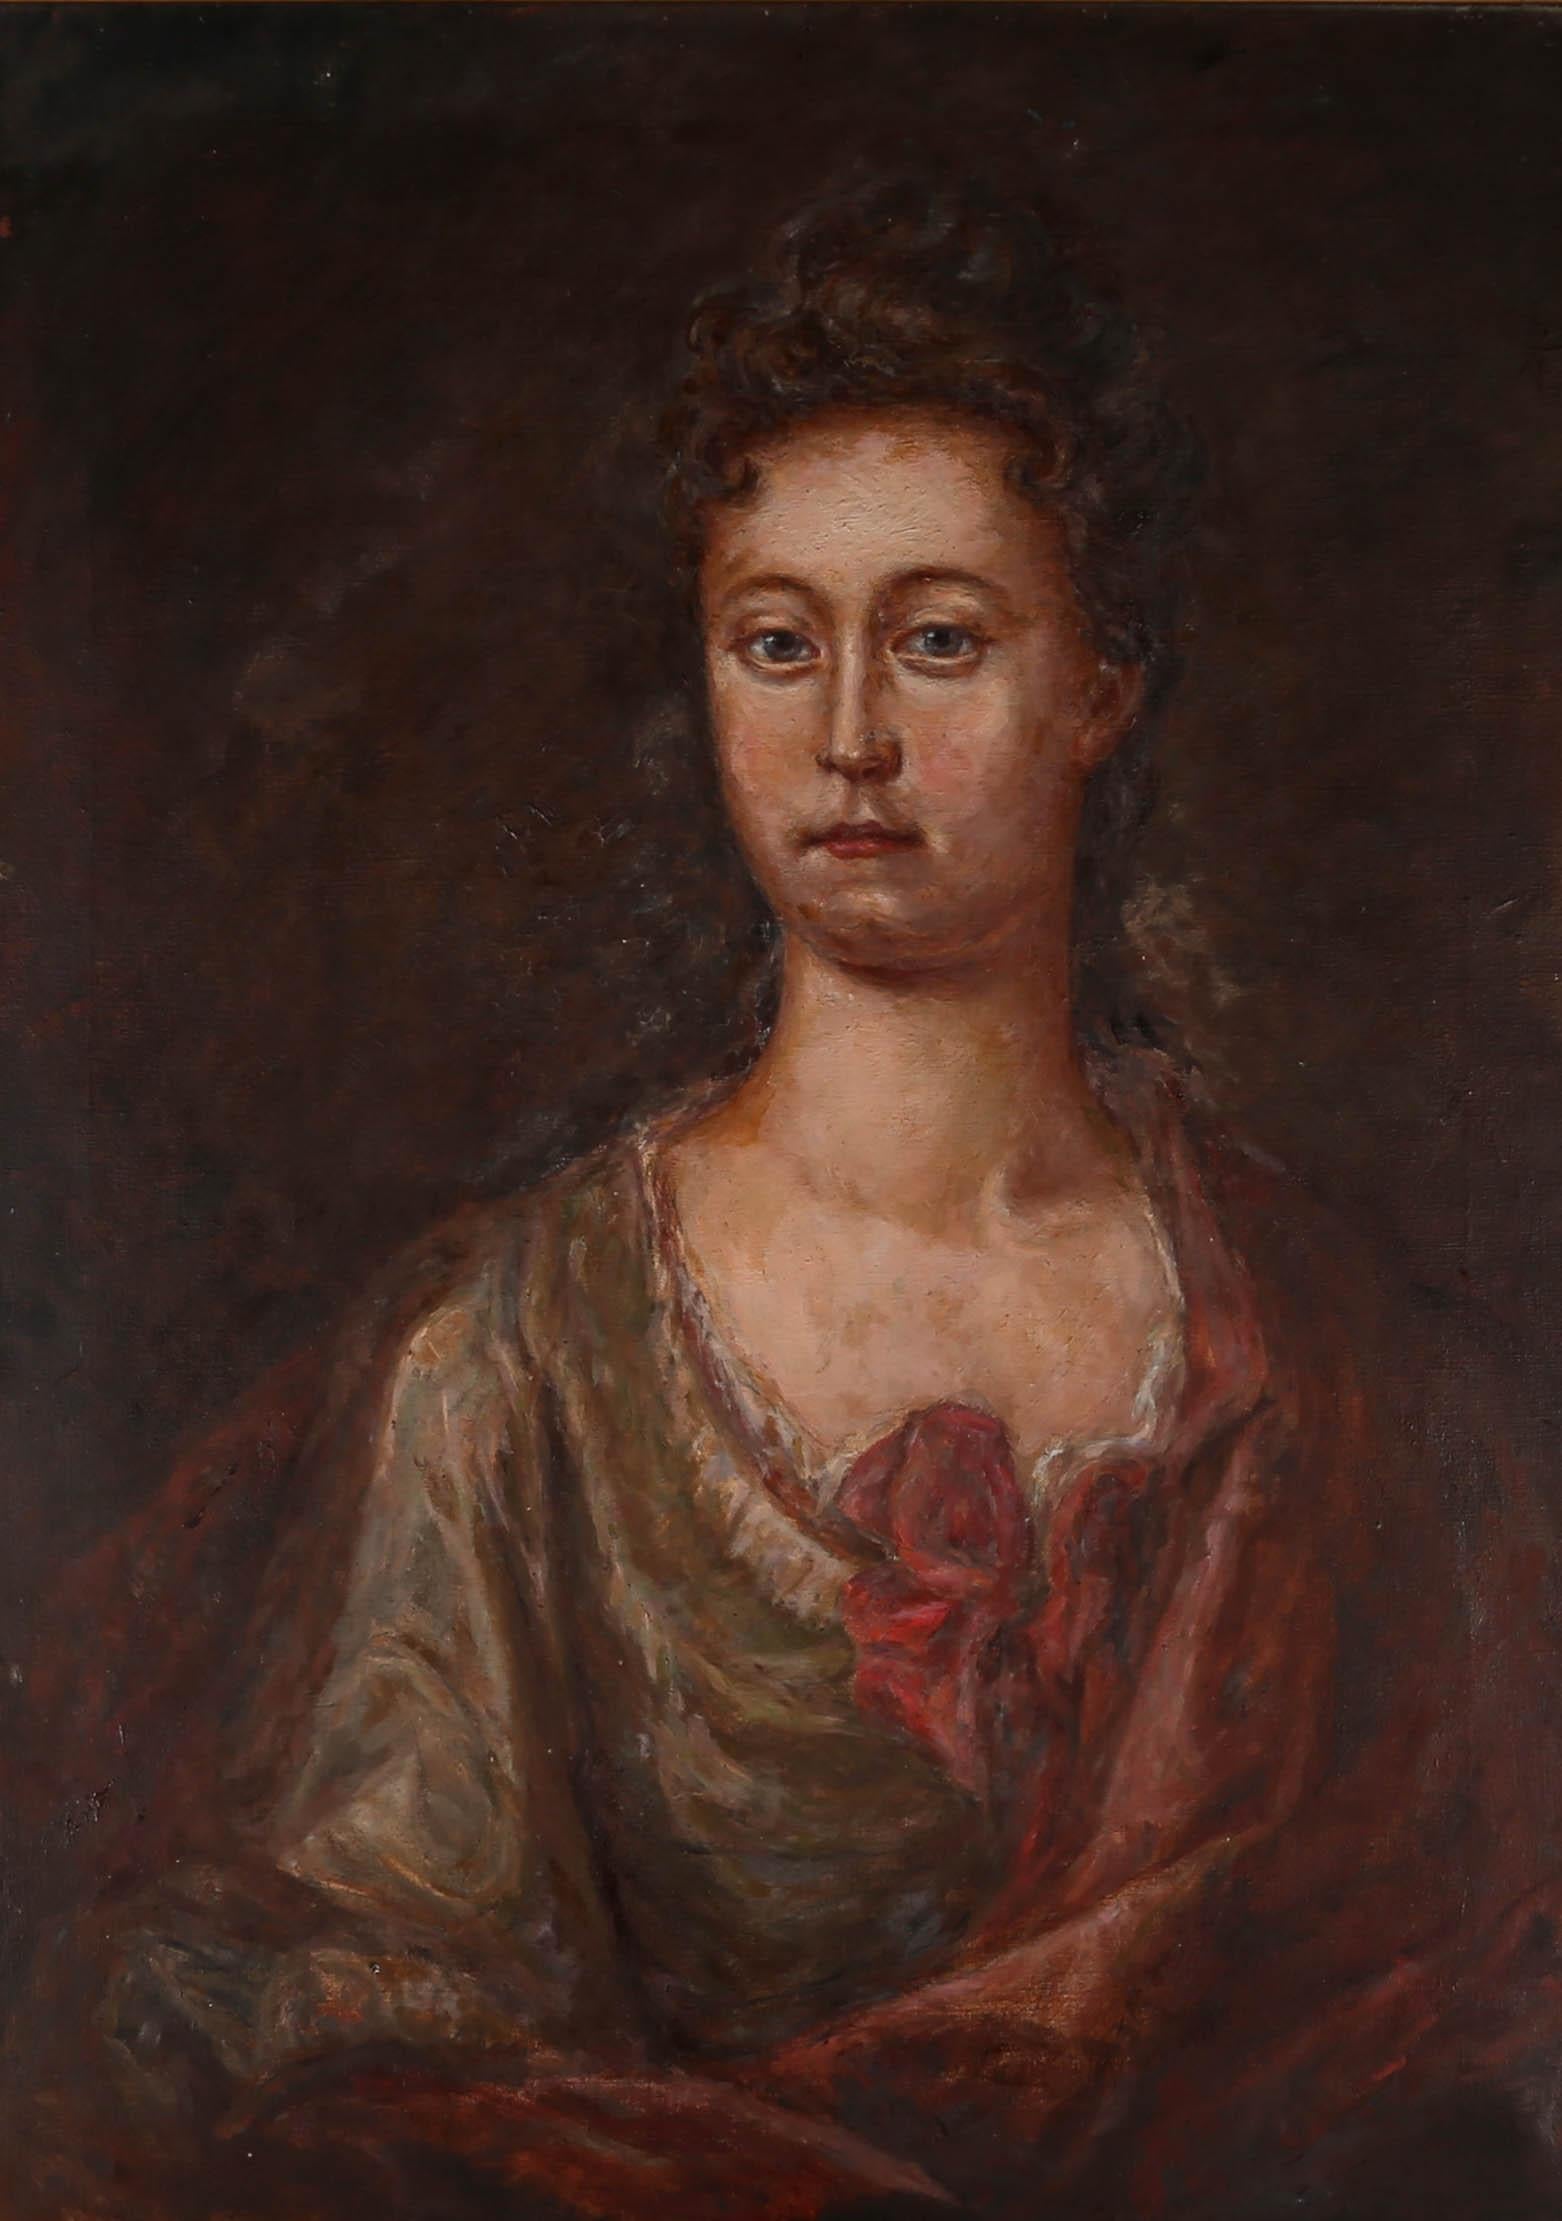 A fine early 20th Century copy of the original portrait (by an unknown artist) of Ann Heron (nee Vining). The sitter is a solemn young woman in a white dress and red cloak. The painting is unsigned and presented in a 20th Century gilt effect frame.